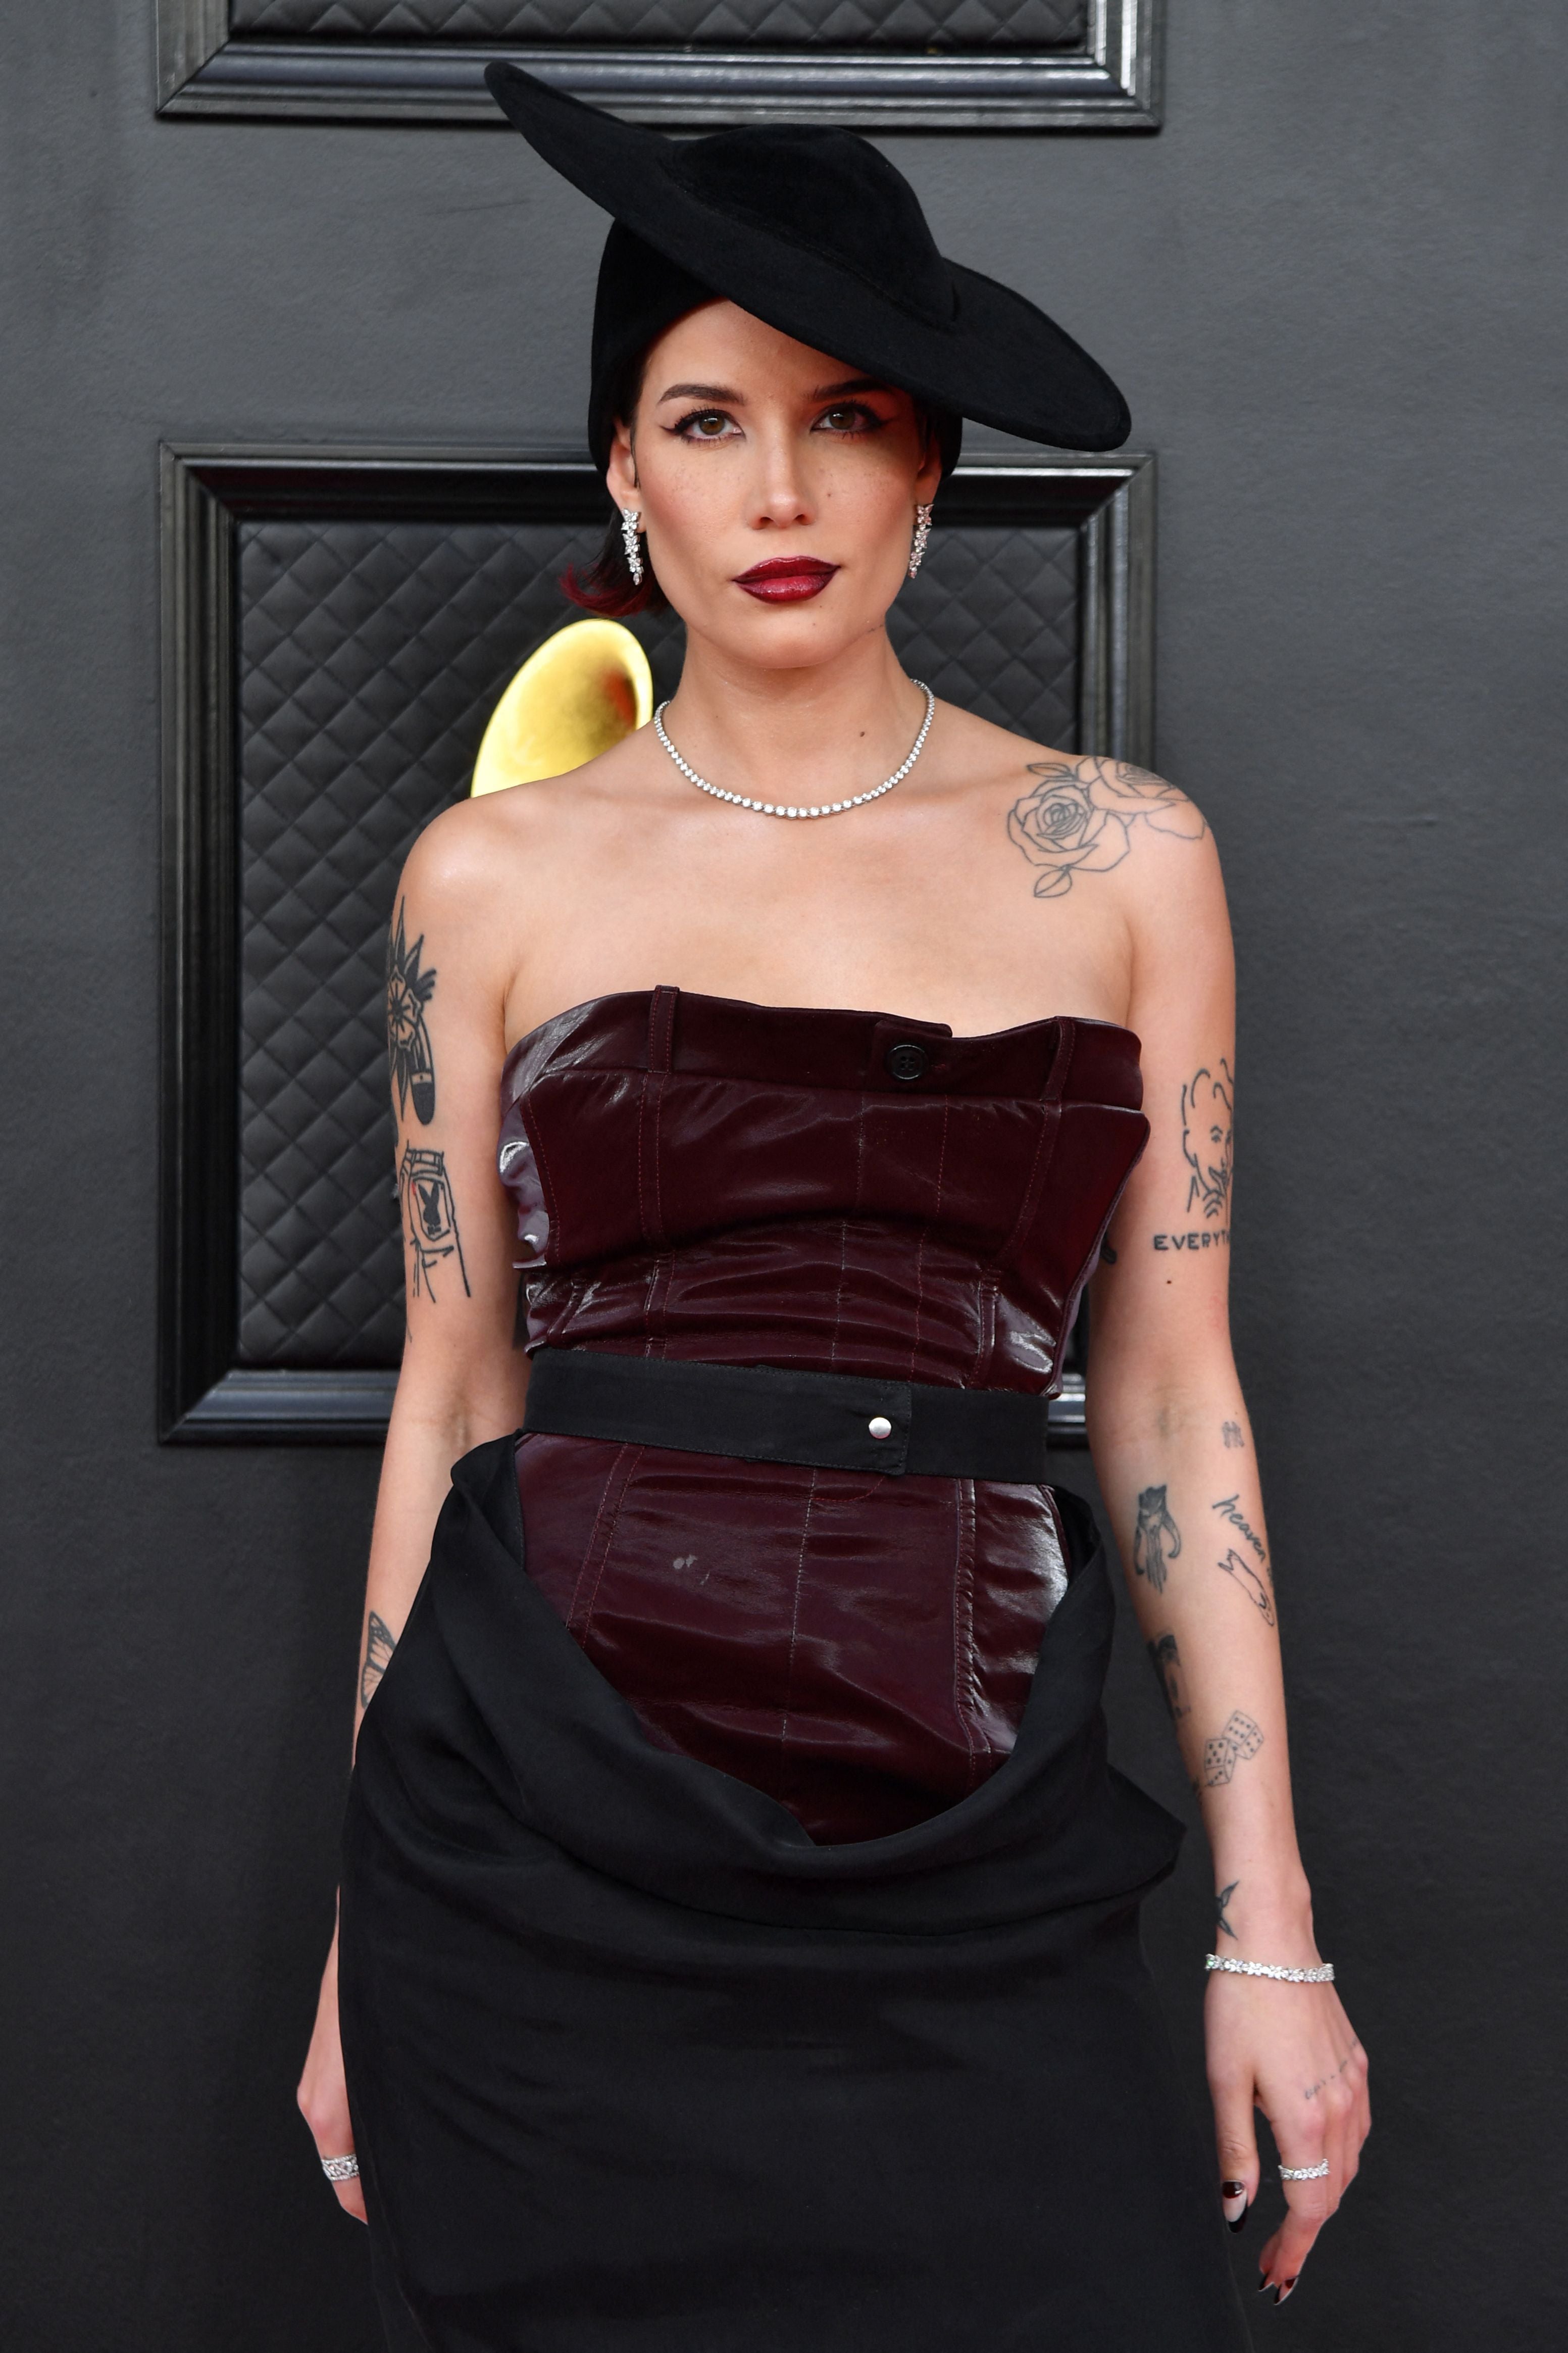 Halsey Rocks the 2022 GRAMMYs Red Carpet Just Days After Having Surgery